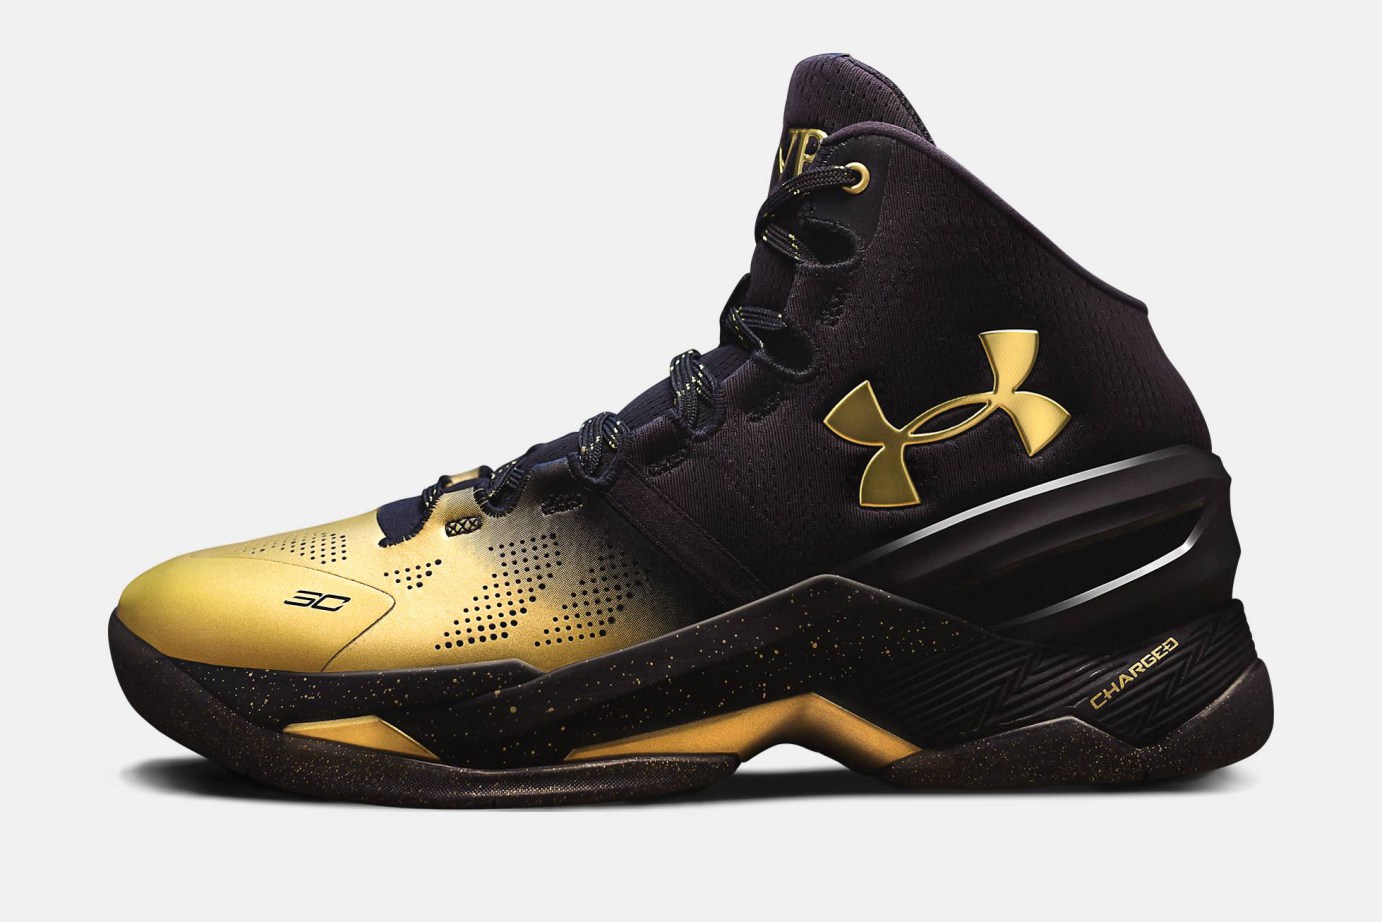 curry 2 black and gold